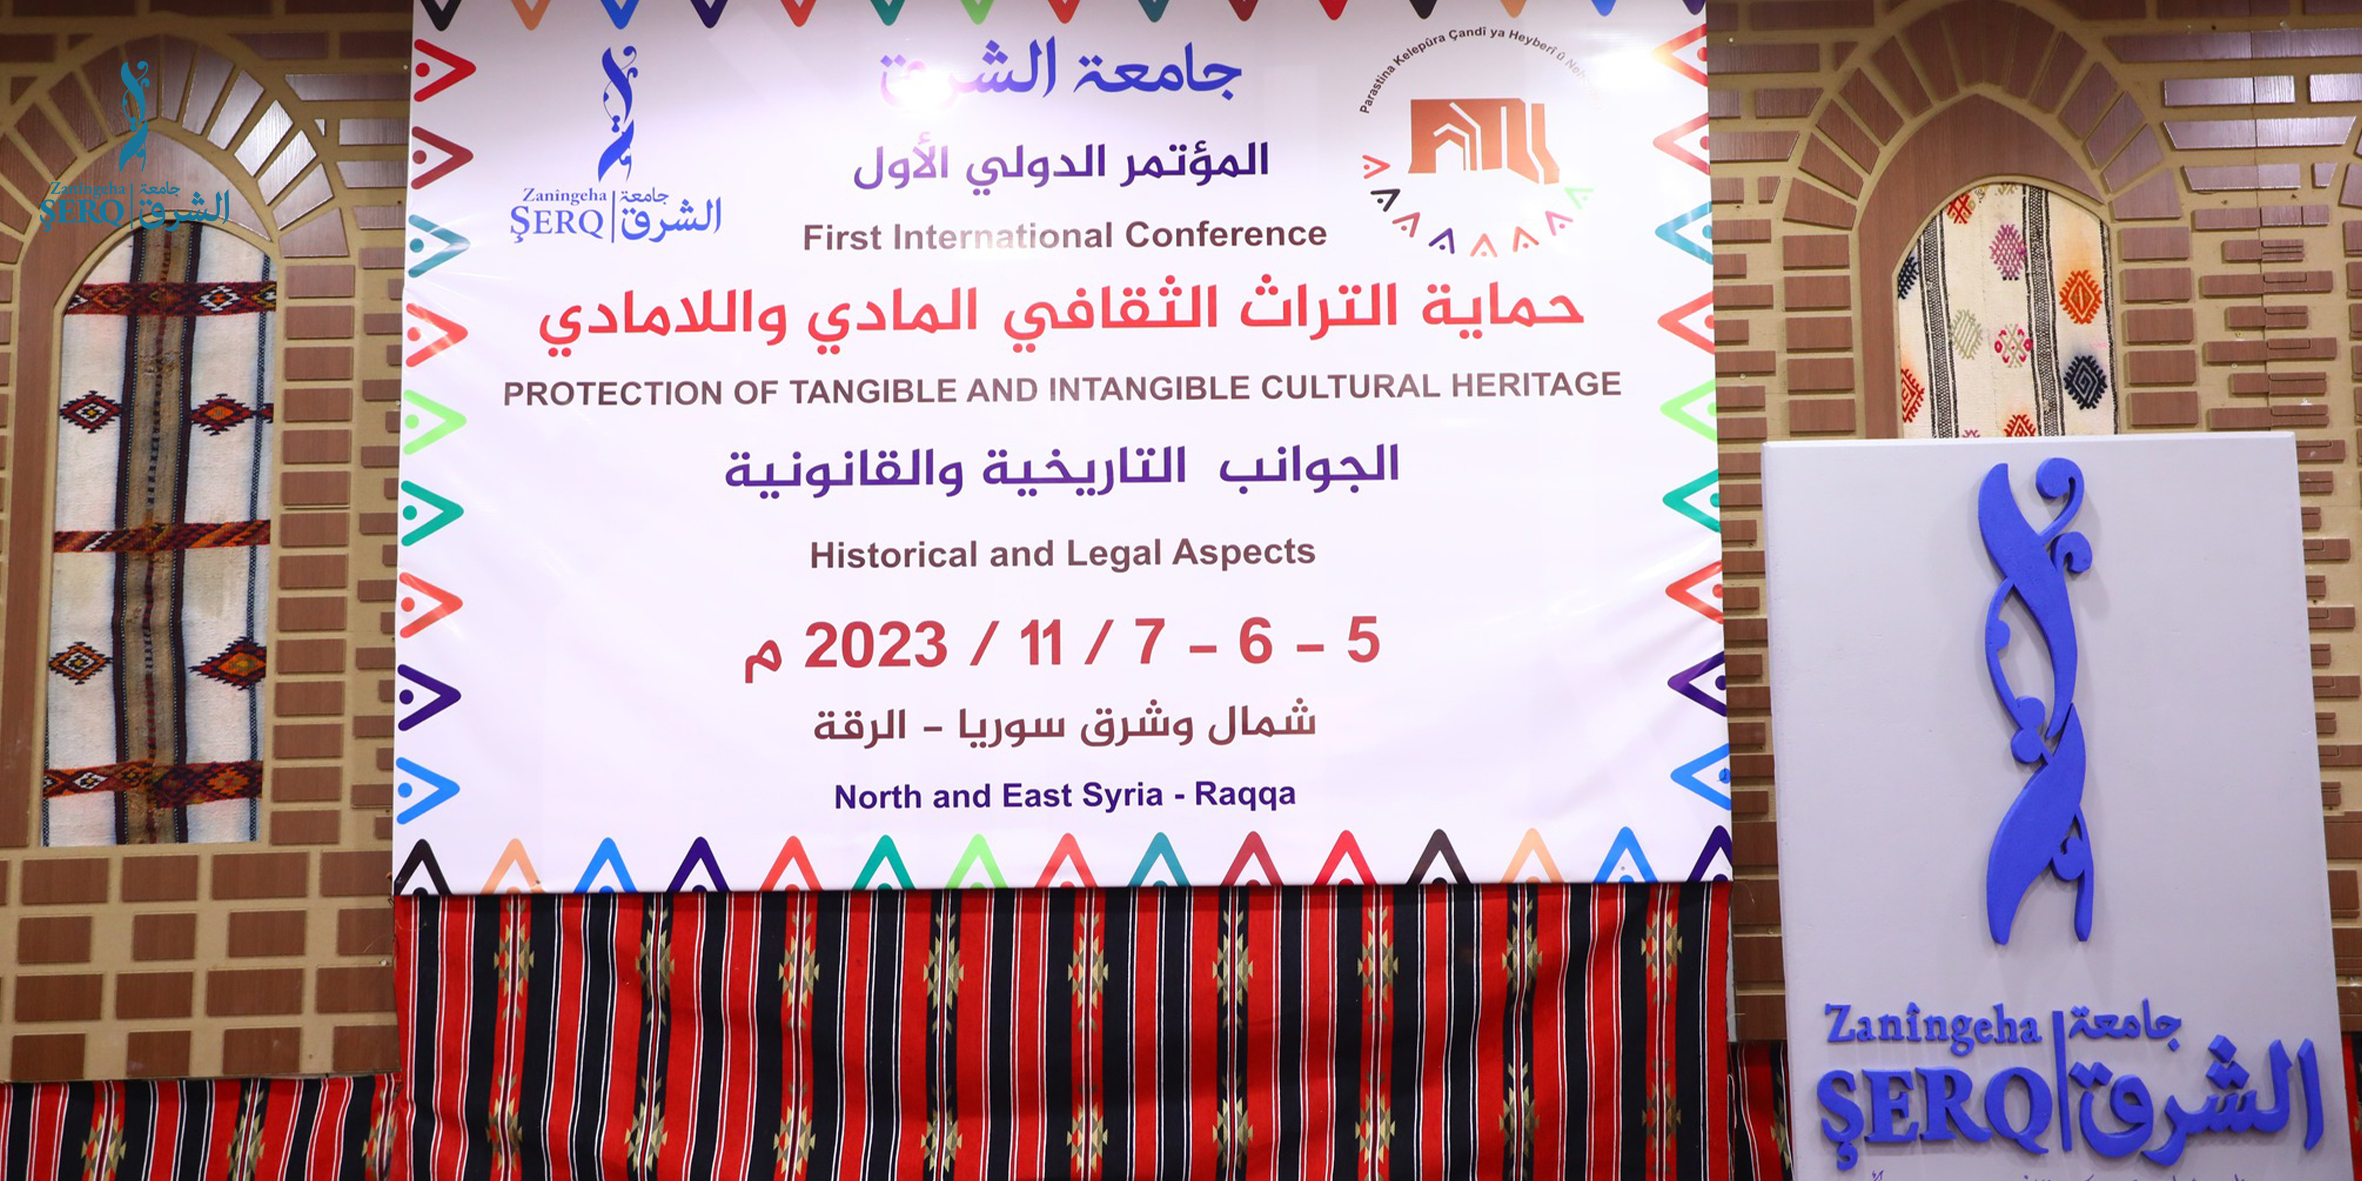 Proposals and recommendations emerging from the First International Conference for the Protection of Cultural Heritage at Al-Sharq University